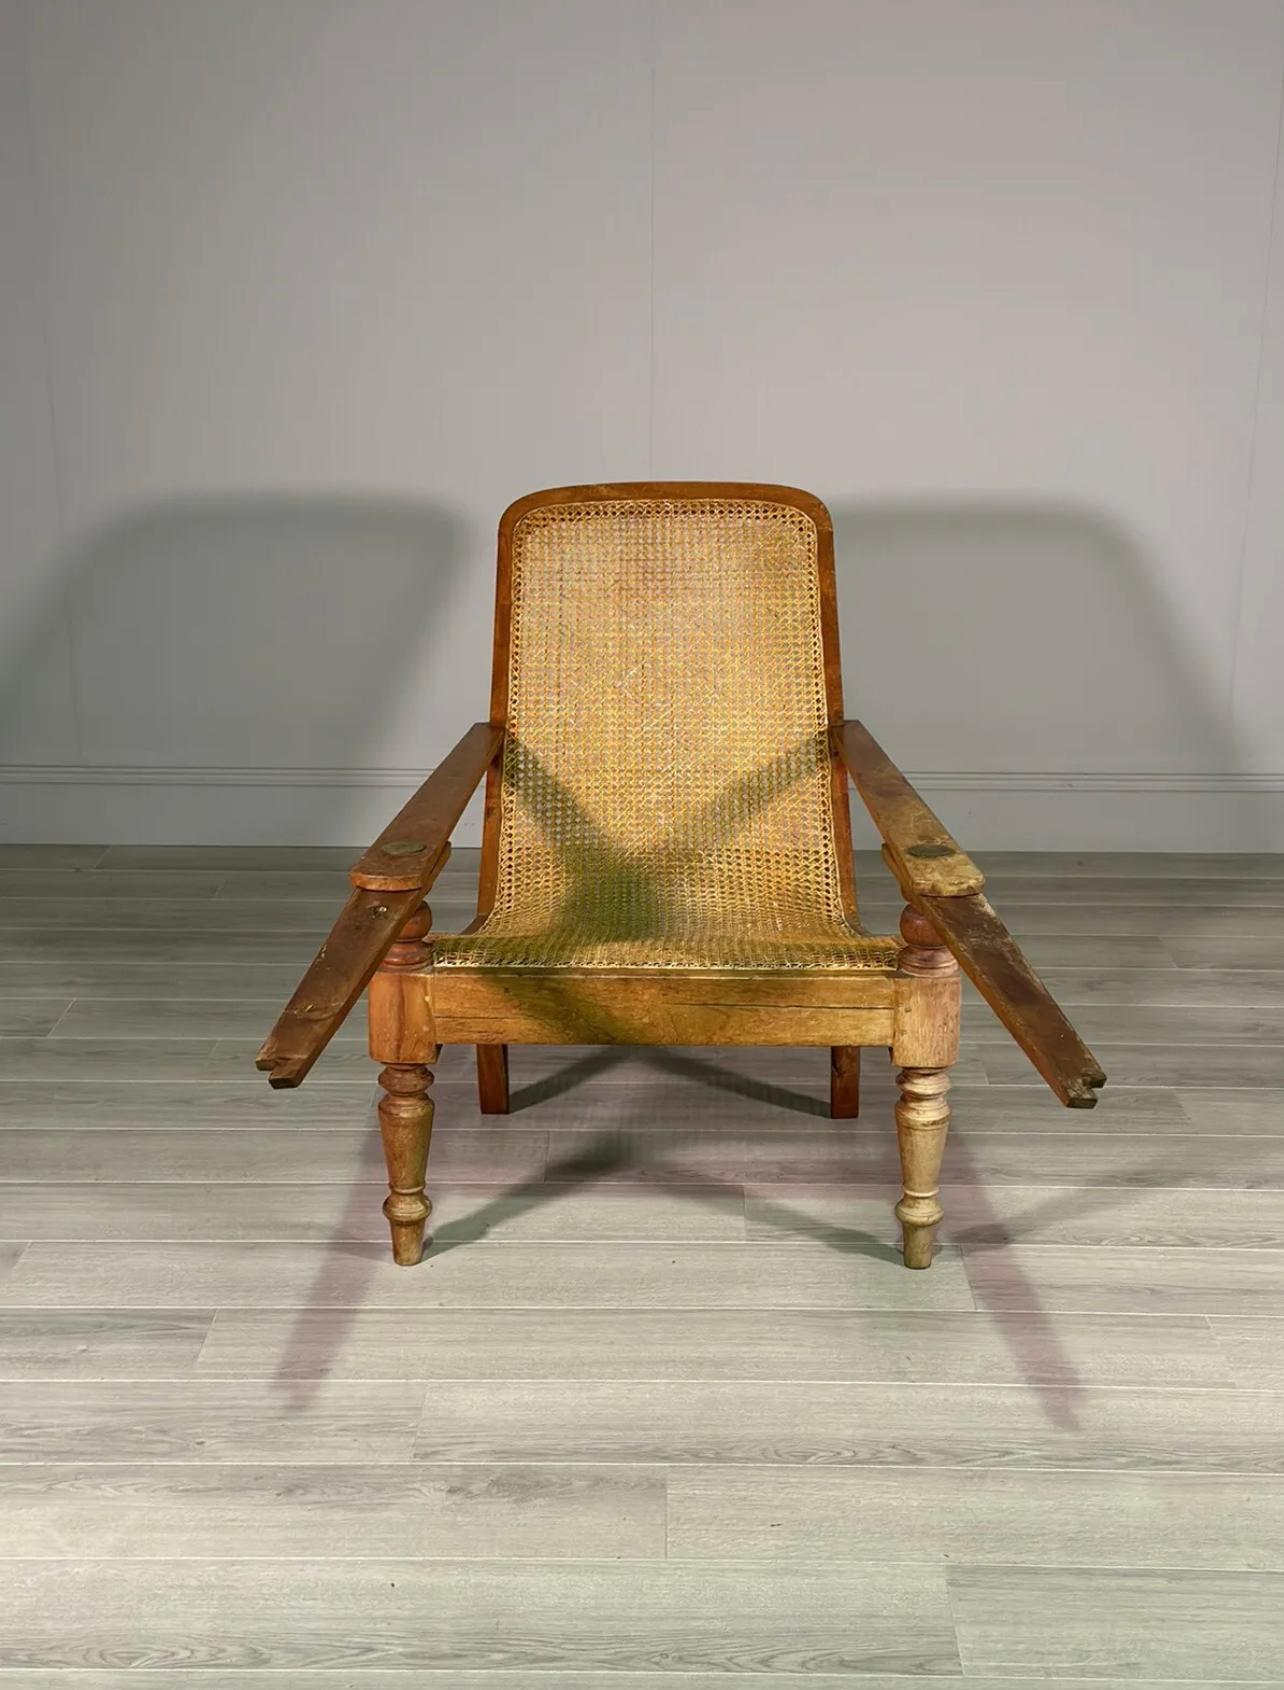 An early 20th century plantation chair, the chair is made from birch wood with a cane seat which has one very small repair. The chair is large in size with extra long leg rests and is a fine example in very good condition.

Seat Height - 43.5cm
Seat